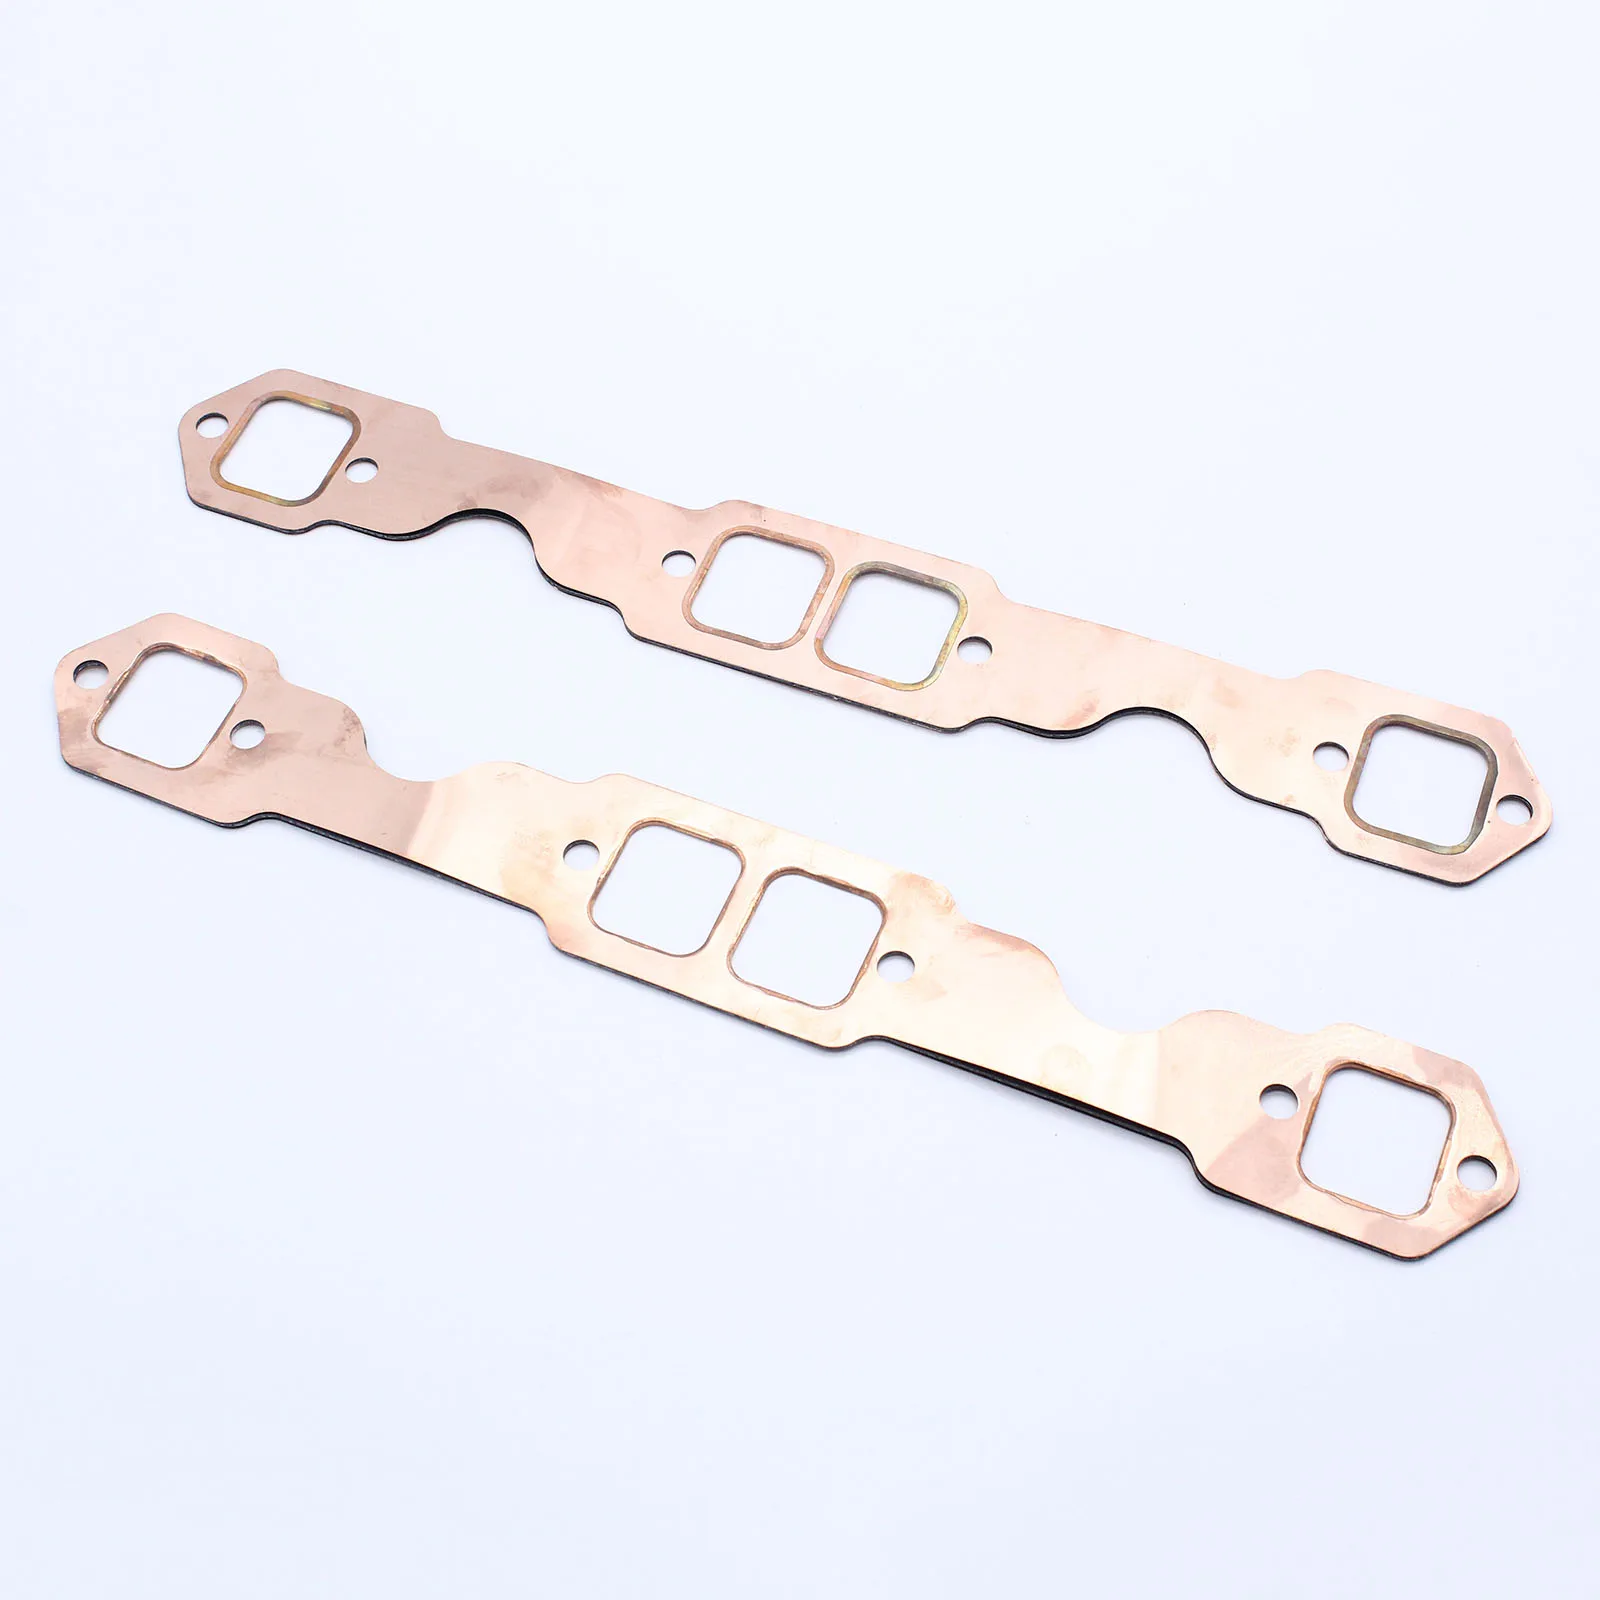 2 Pieces SBC Copper Header Exhaust Gasket for Chevy 283 327 350 383 400 Exhaust